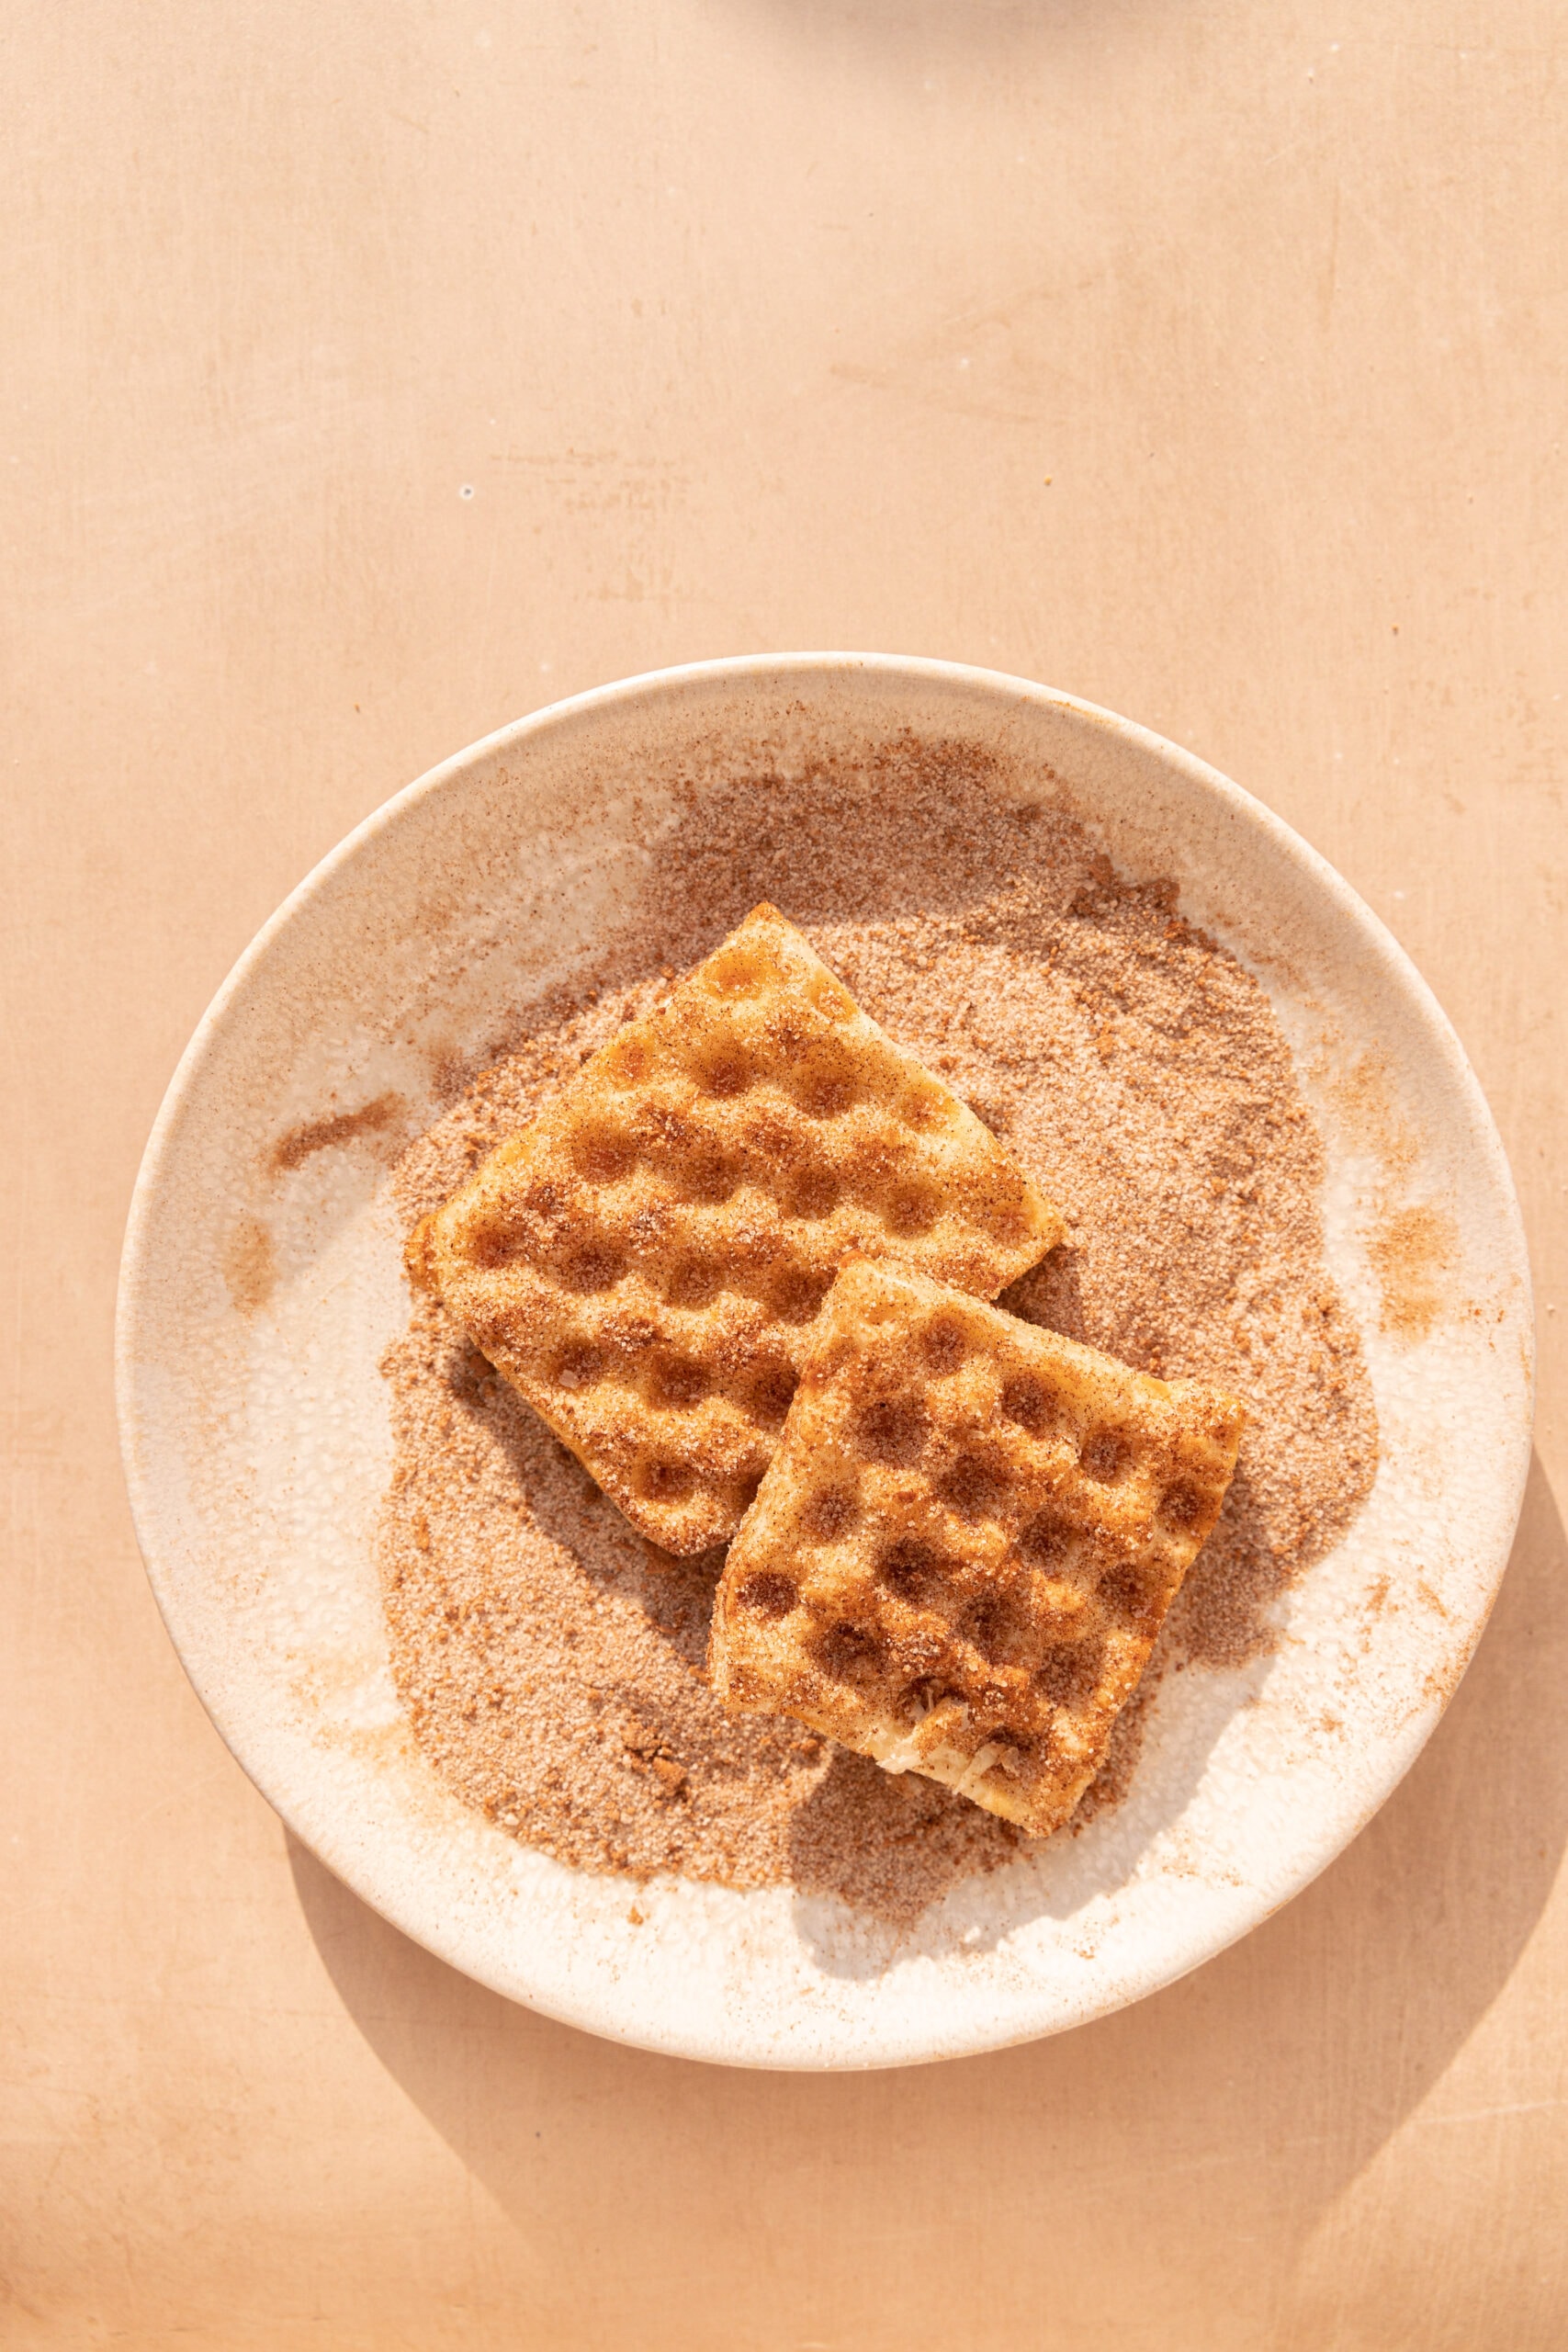 Overhead image of two puff pastry waffles on a plate with cinnamon sugar.